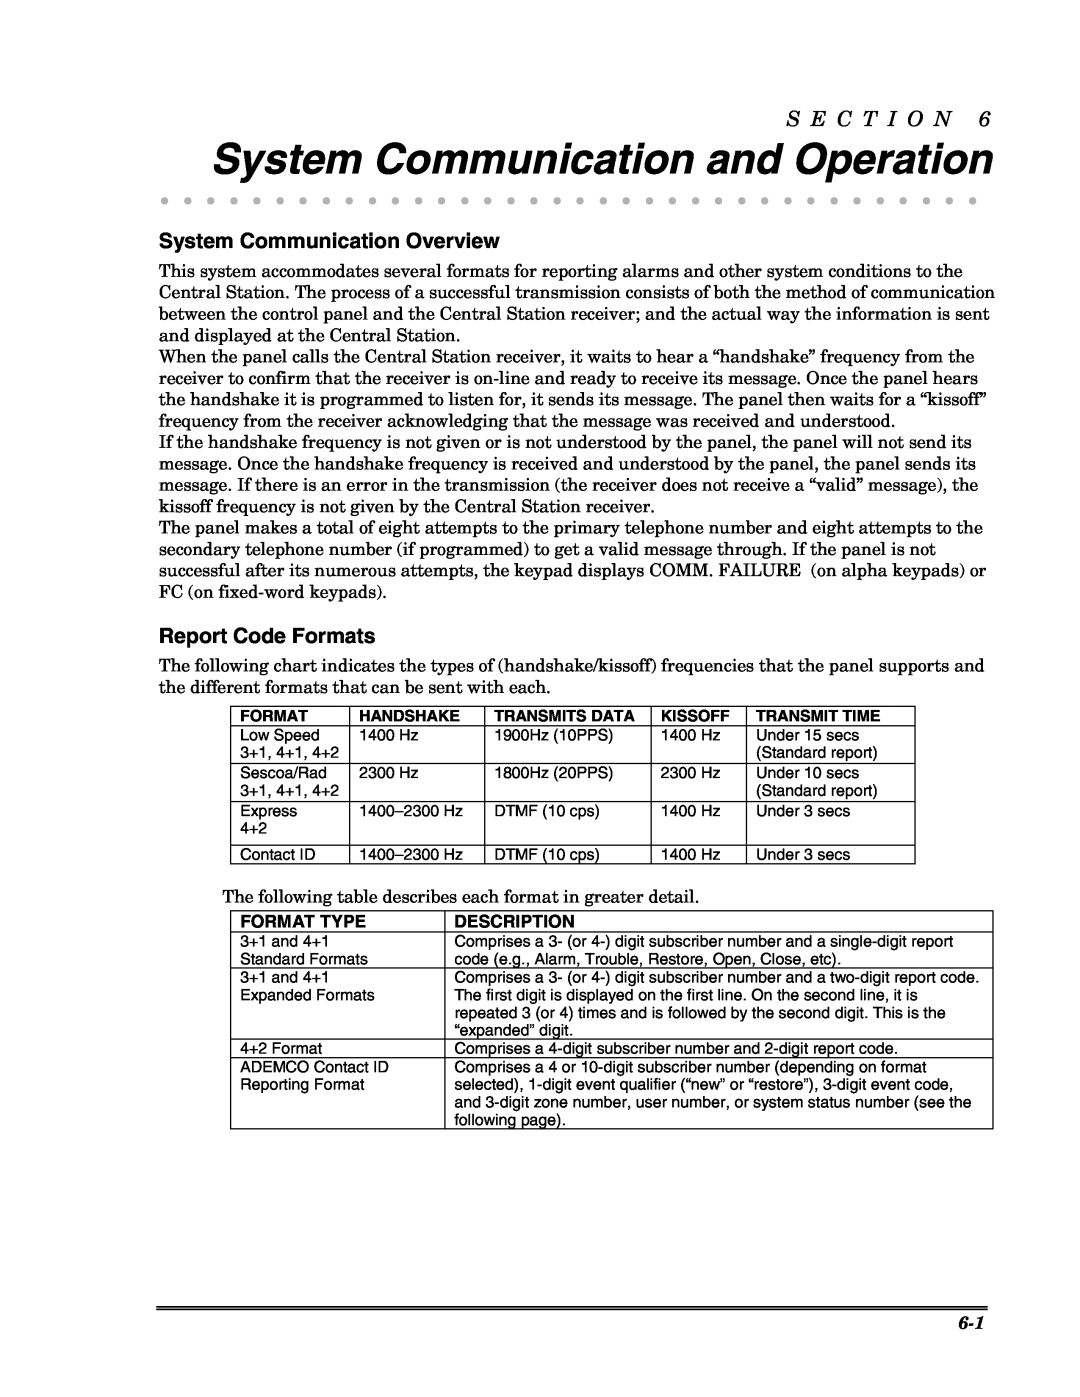 Honeywell Ademco Security Systems System Communication and Operation, System Communication Overview, Report Code Formats 